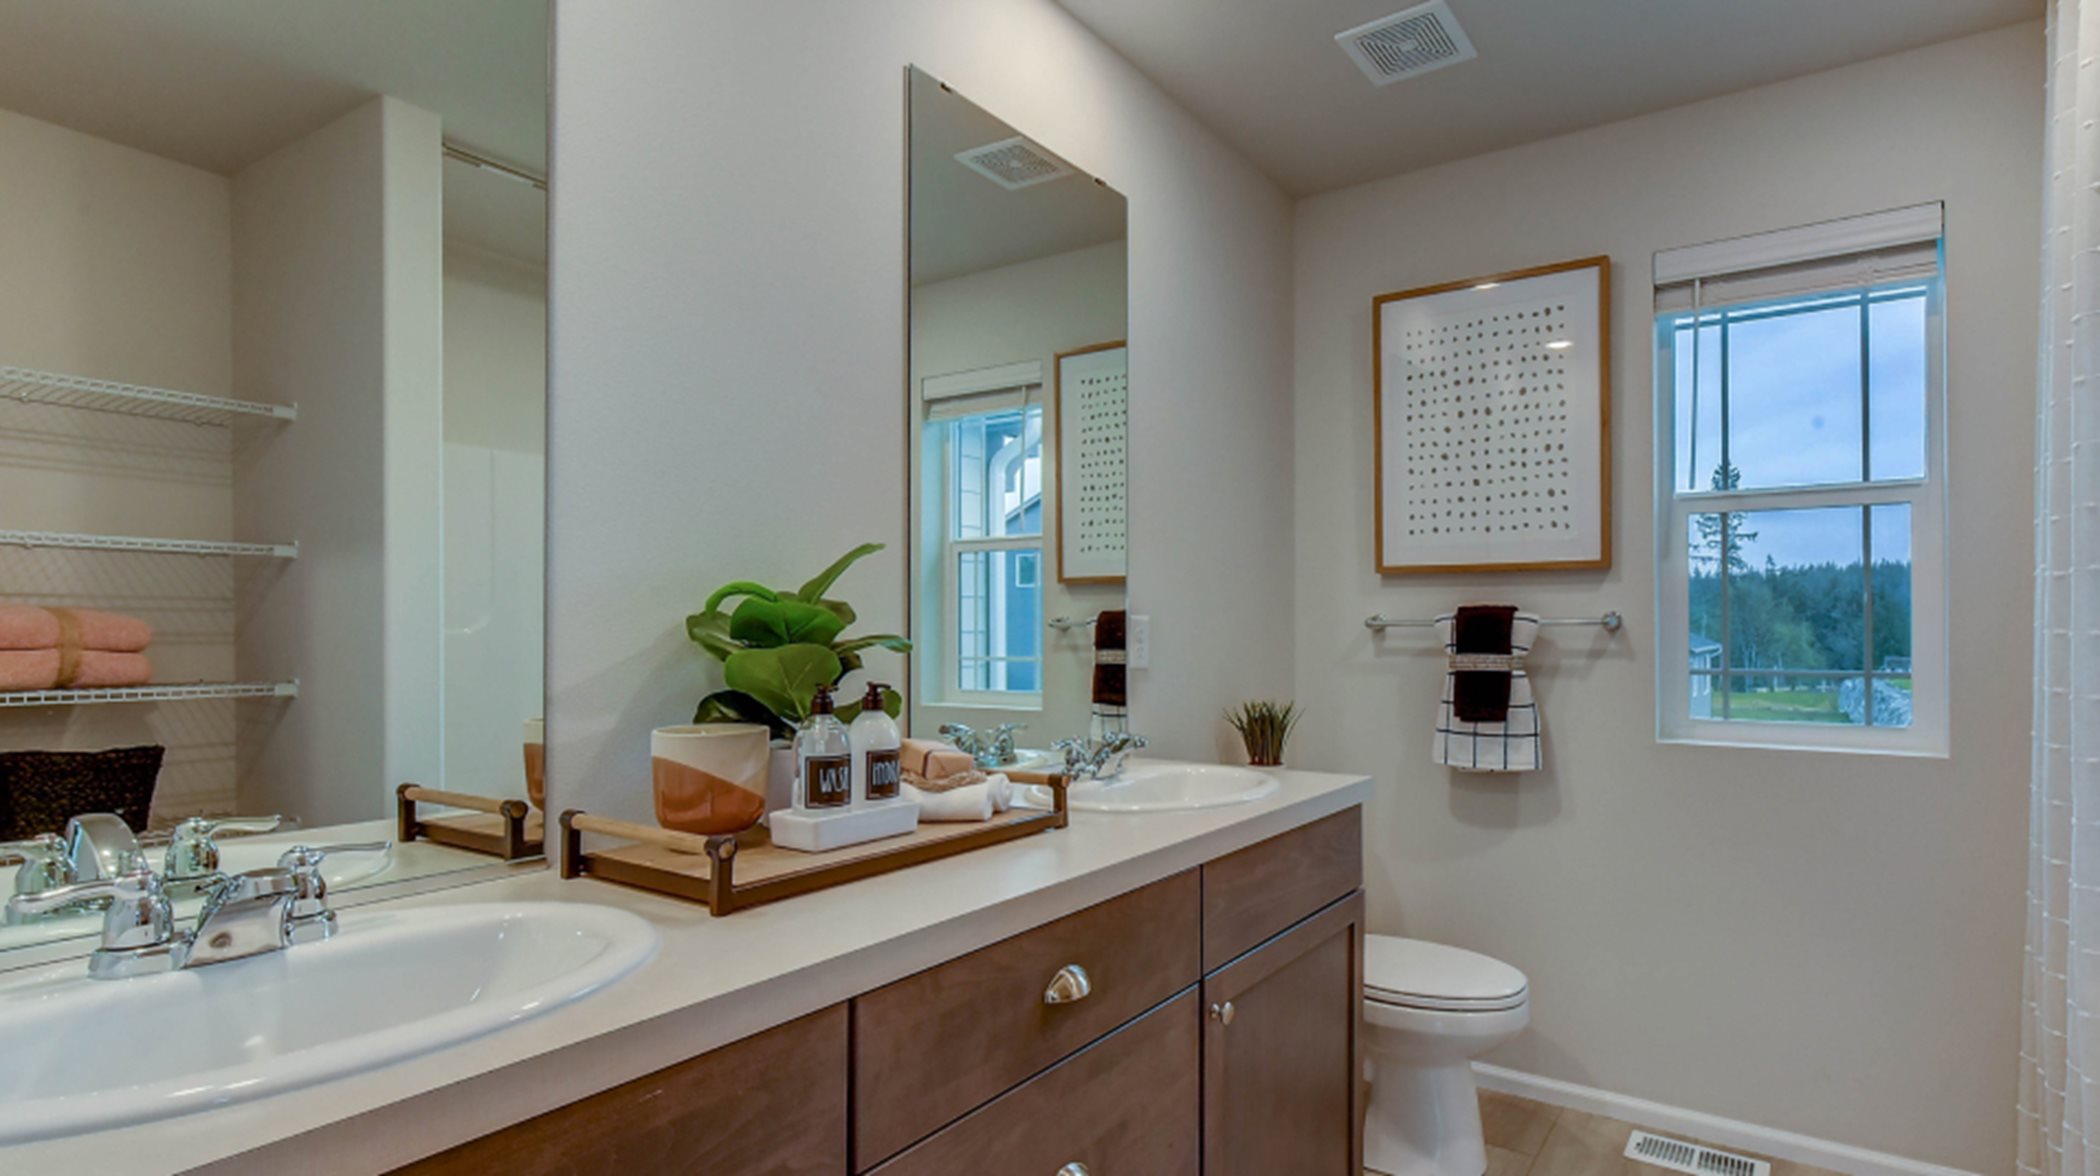 Bathroom sinks with framed mirrors above